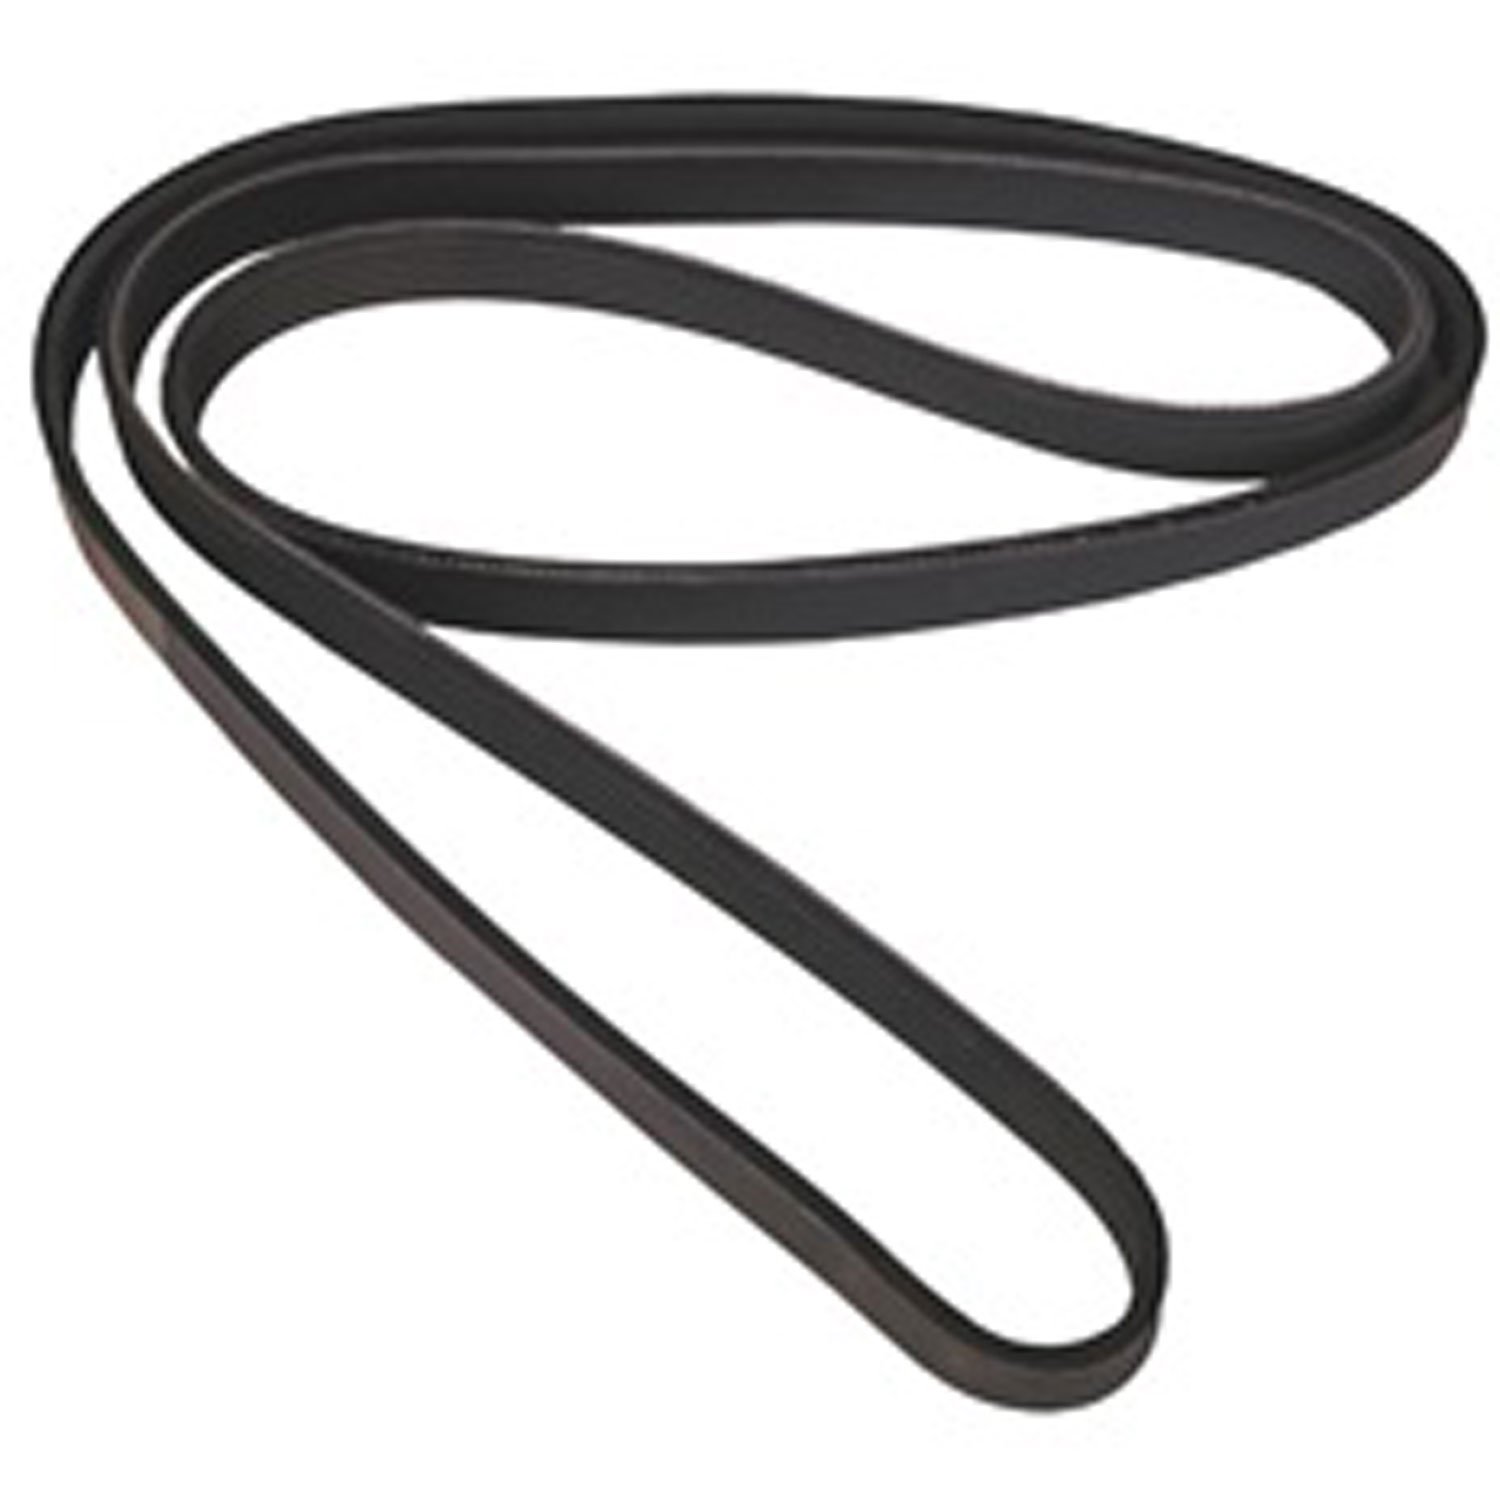 Stock replacement serpentine belt from Omix-ADA, Fits 84-90 Jeep Cherokee XJ with 2.5 liter engine and air conditioning.